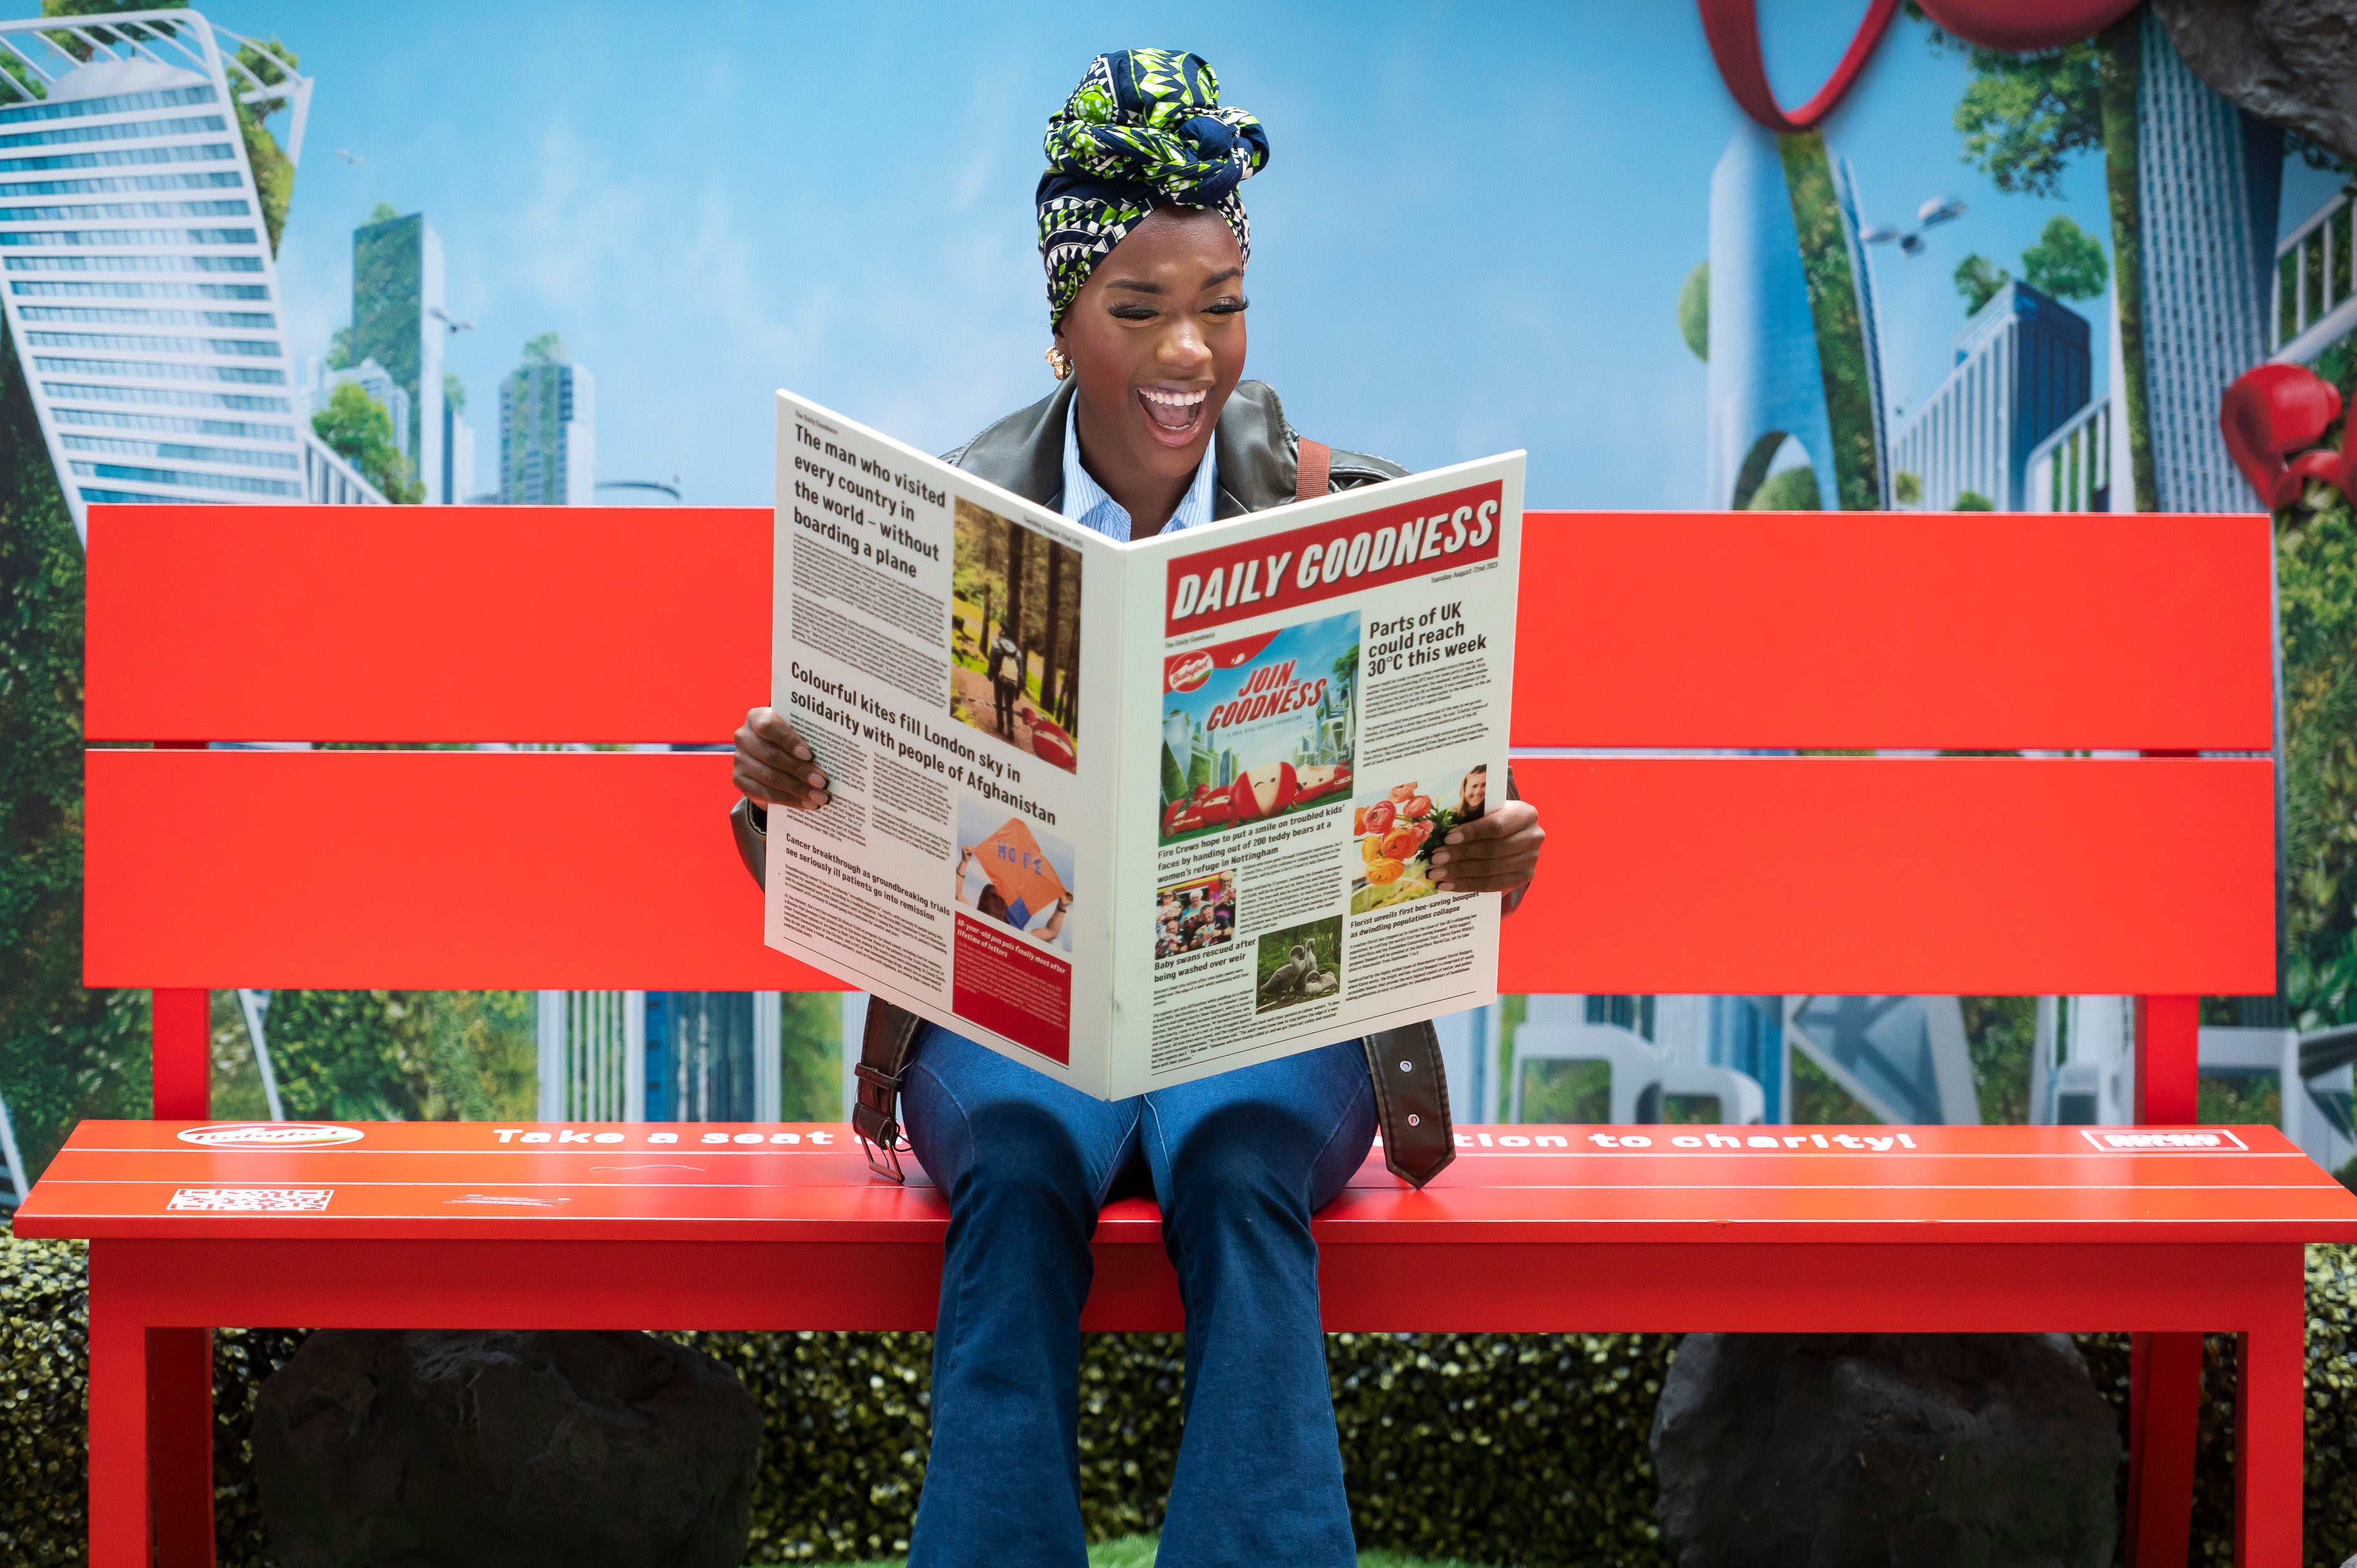 The research was commissioned by Babybel to mark the creation of it’s Goodness Bench inside King’s Cross Station, London